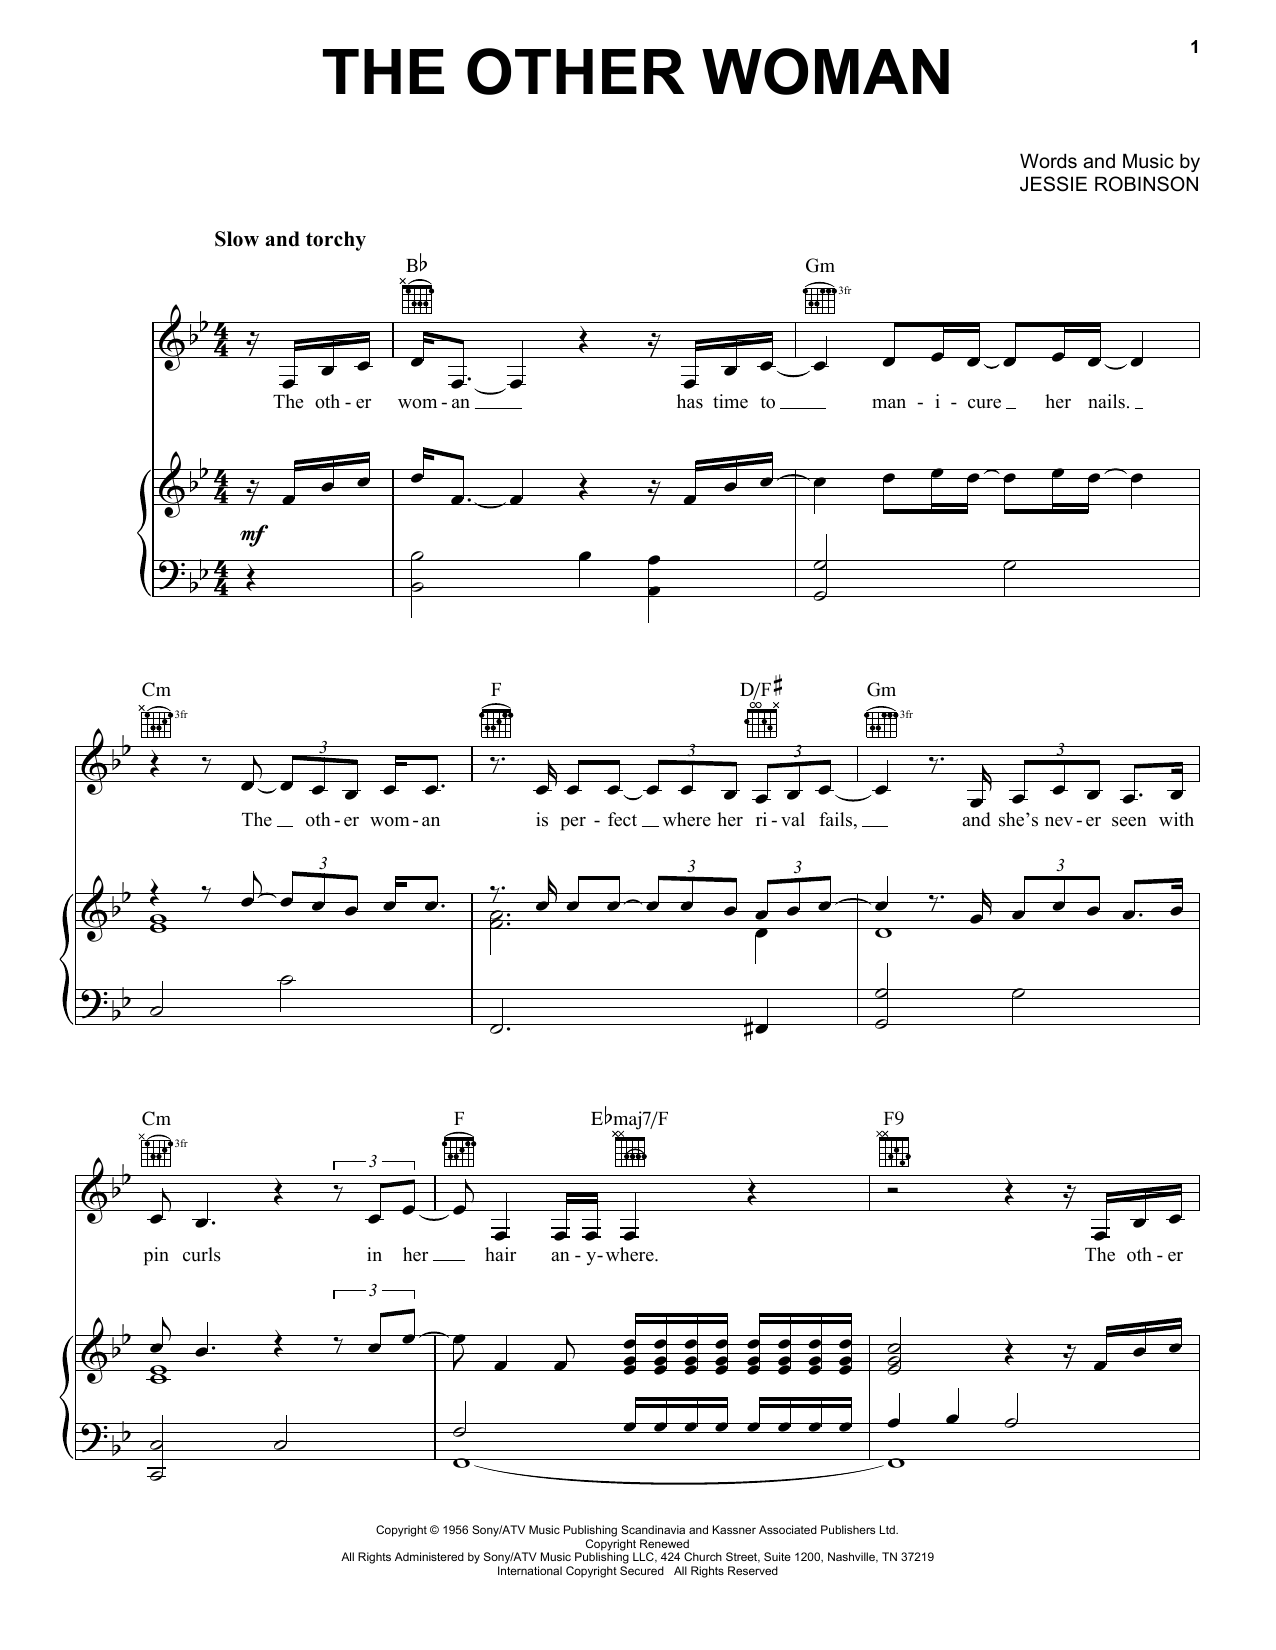 Download Lana Del Rey The Other Woman Sheet Music